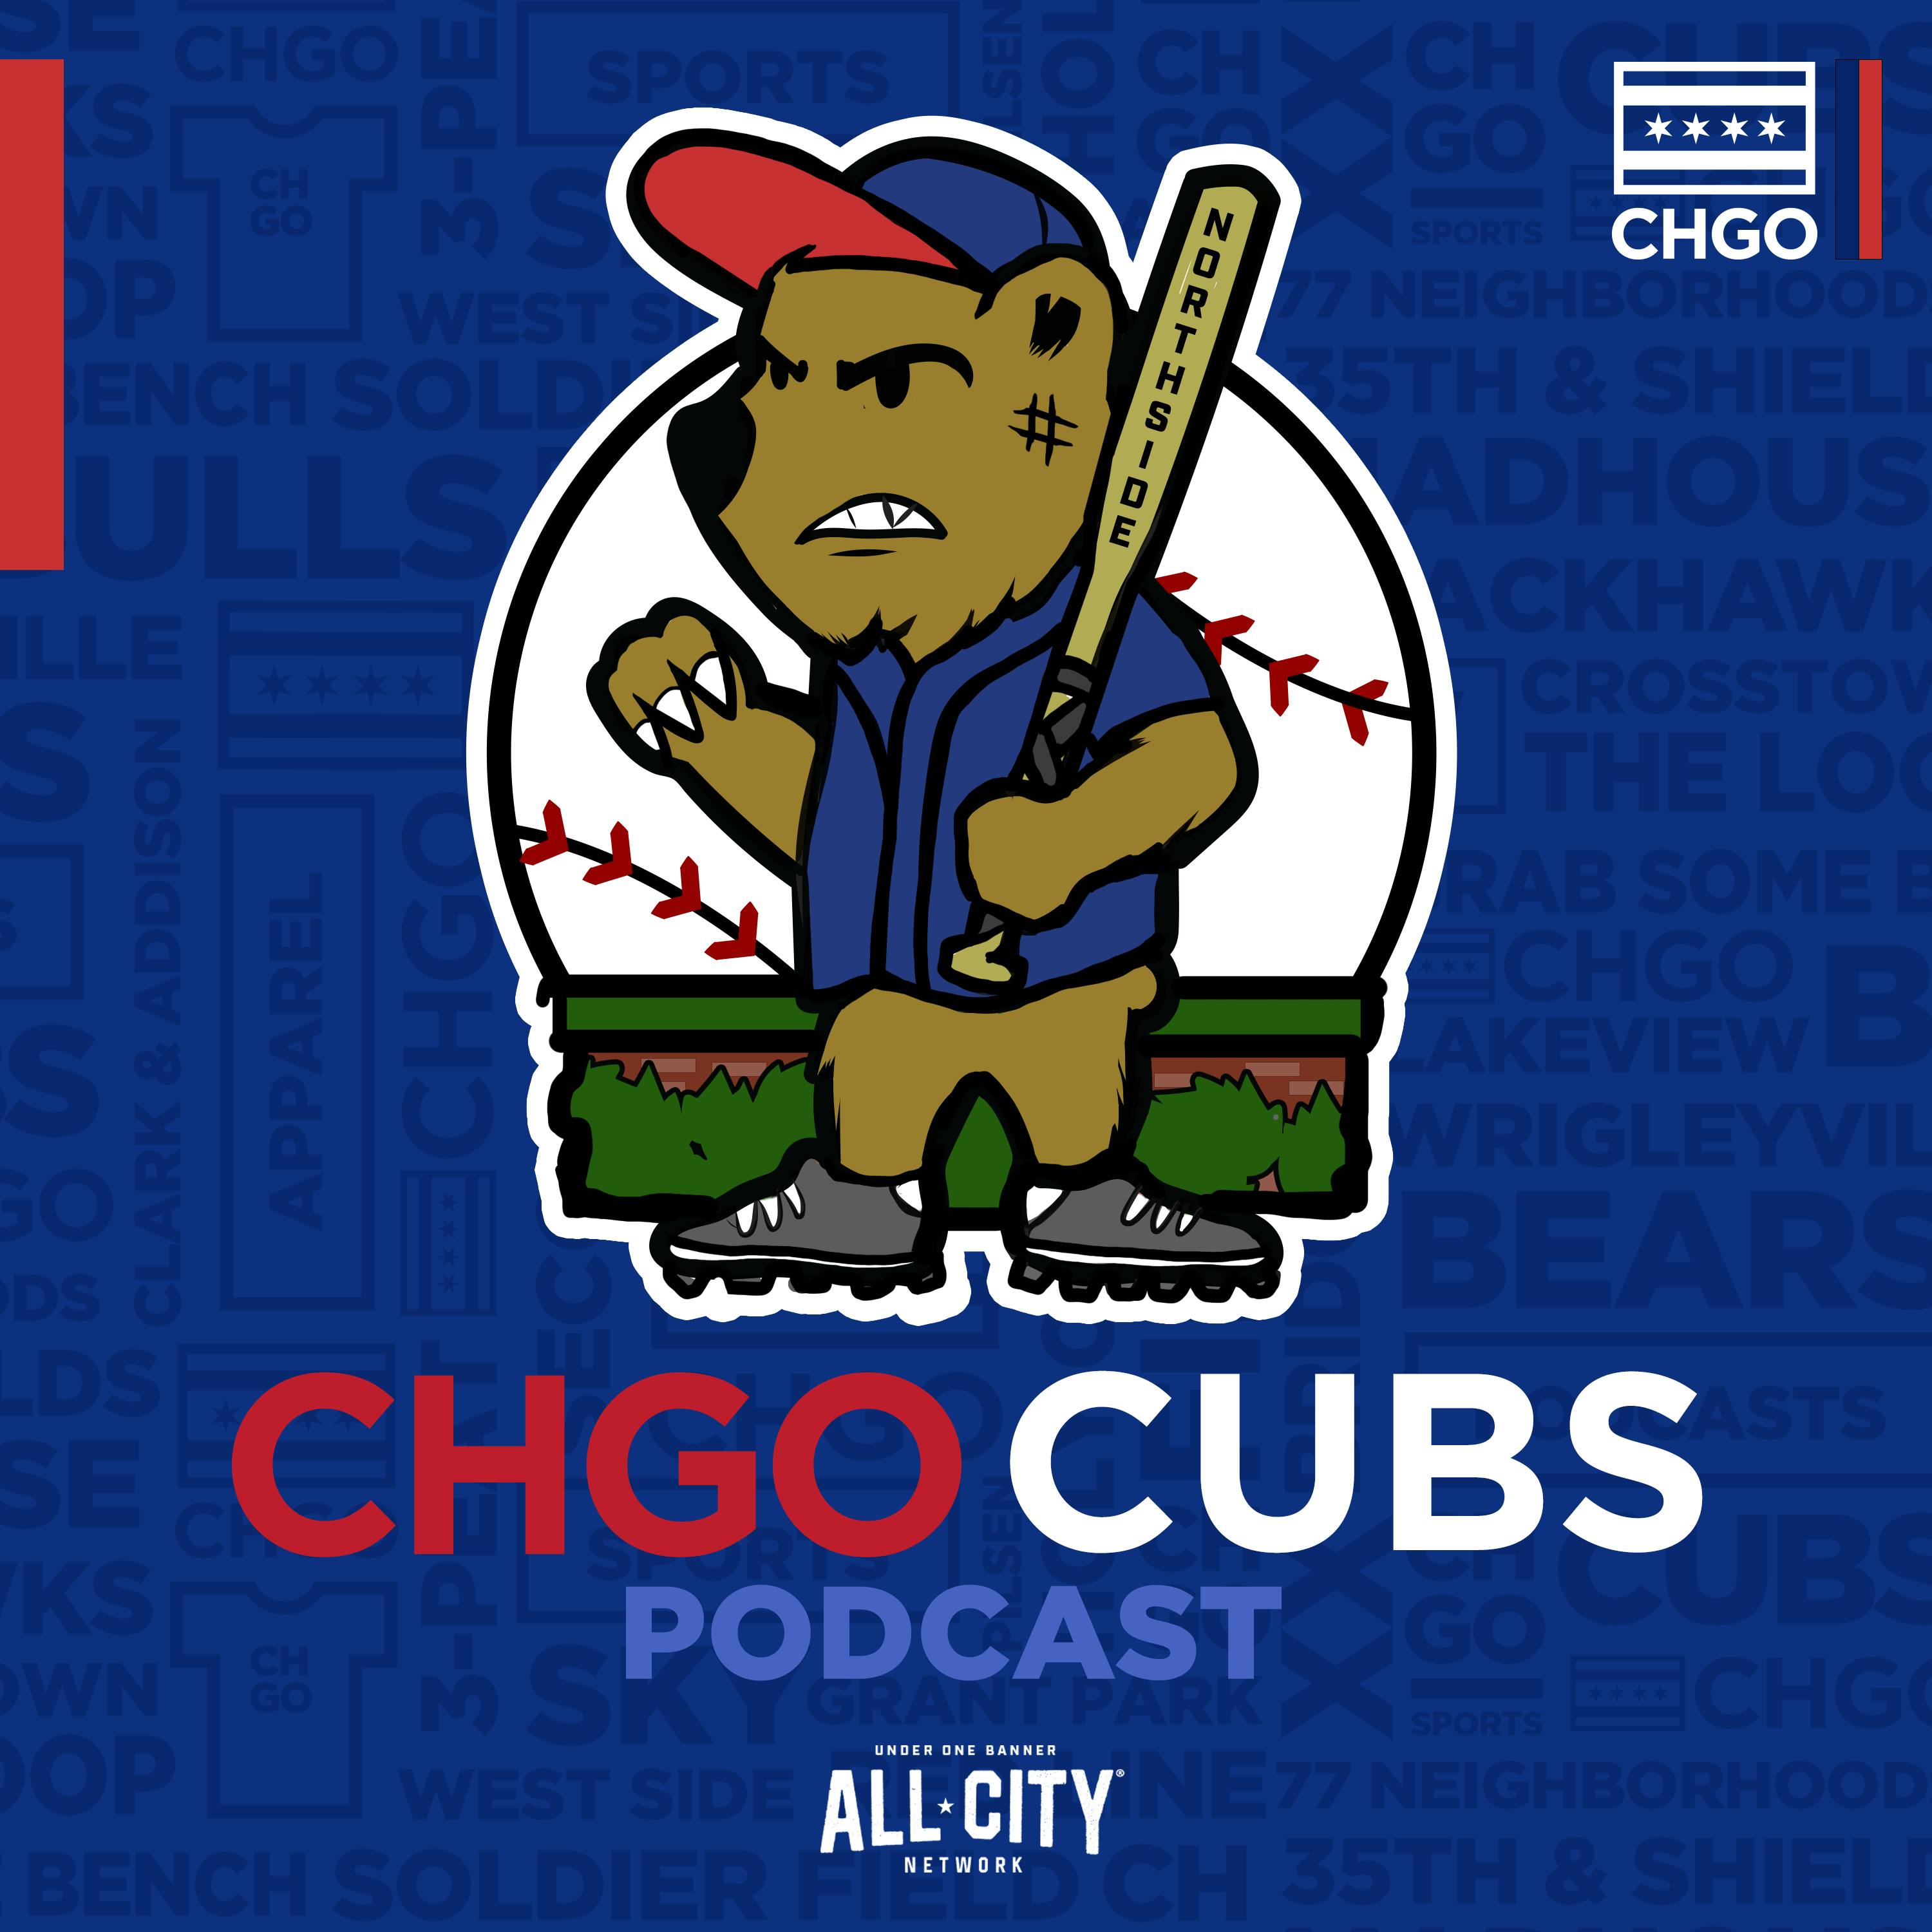 Weekly Recap by Corey and Brendan: Christopher Morel powers 24-17 Cubs with Bellinger, Suzuki, Steele, and Hendricks returning